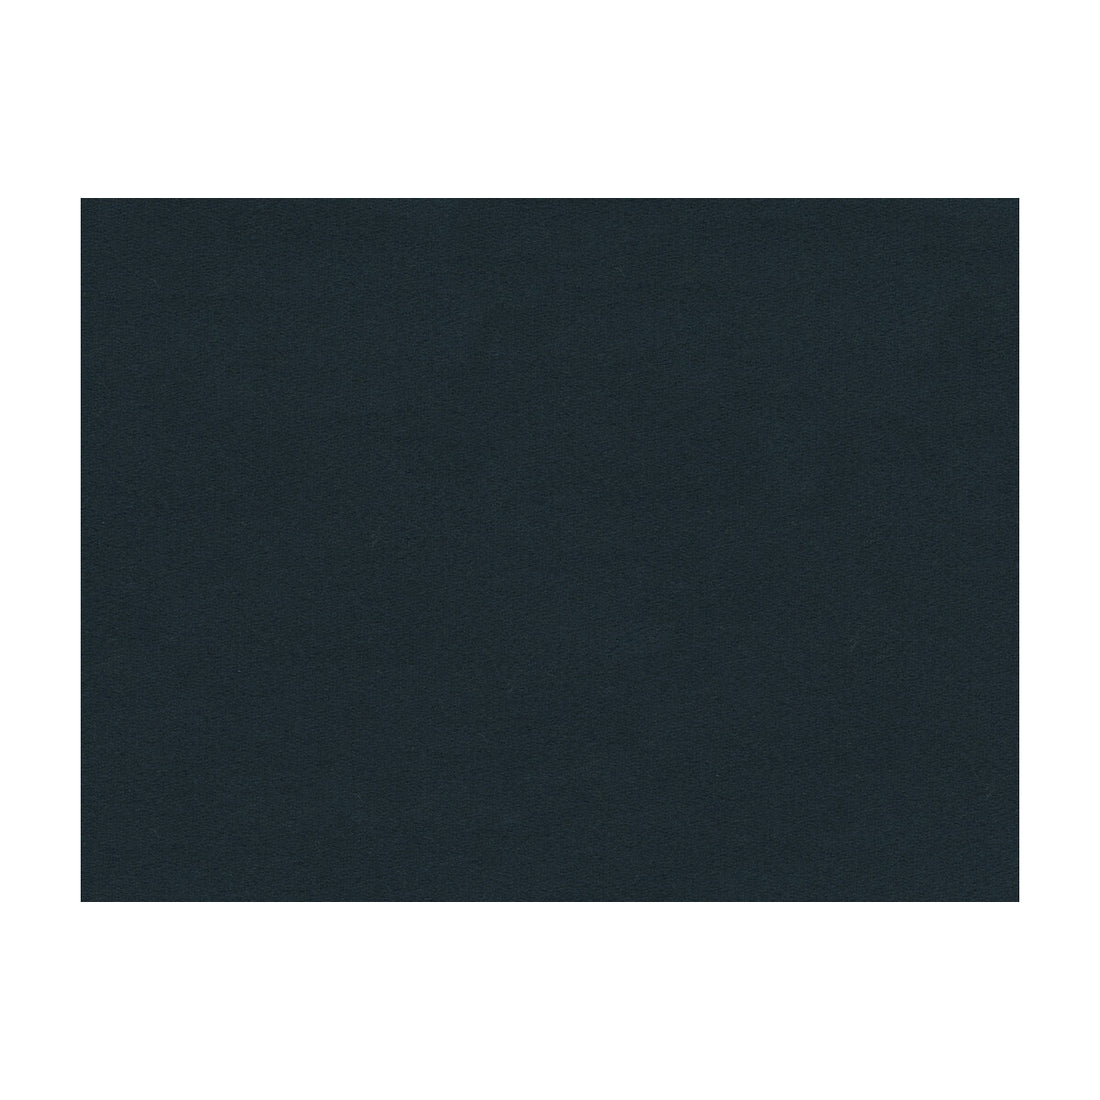 Chevalier Wool fabric in midnight color - pattern 8013149.50.0 - by Brunschwig &amp; Fils